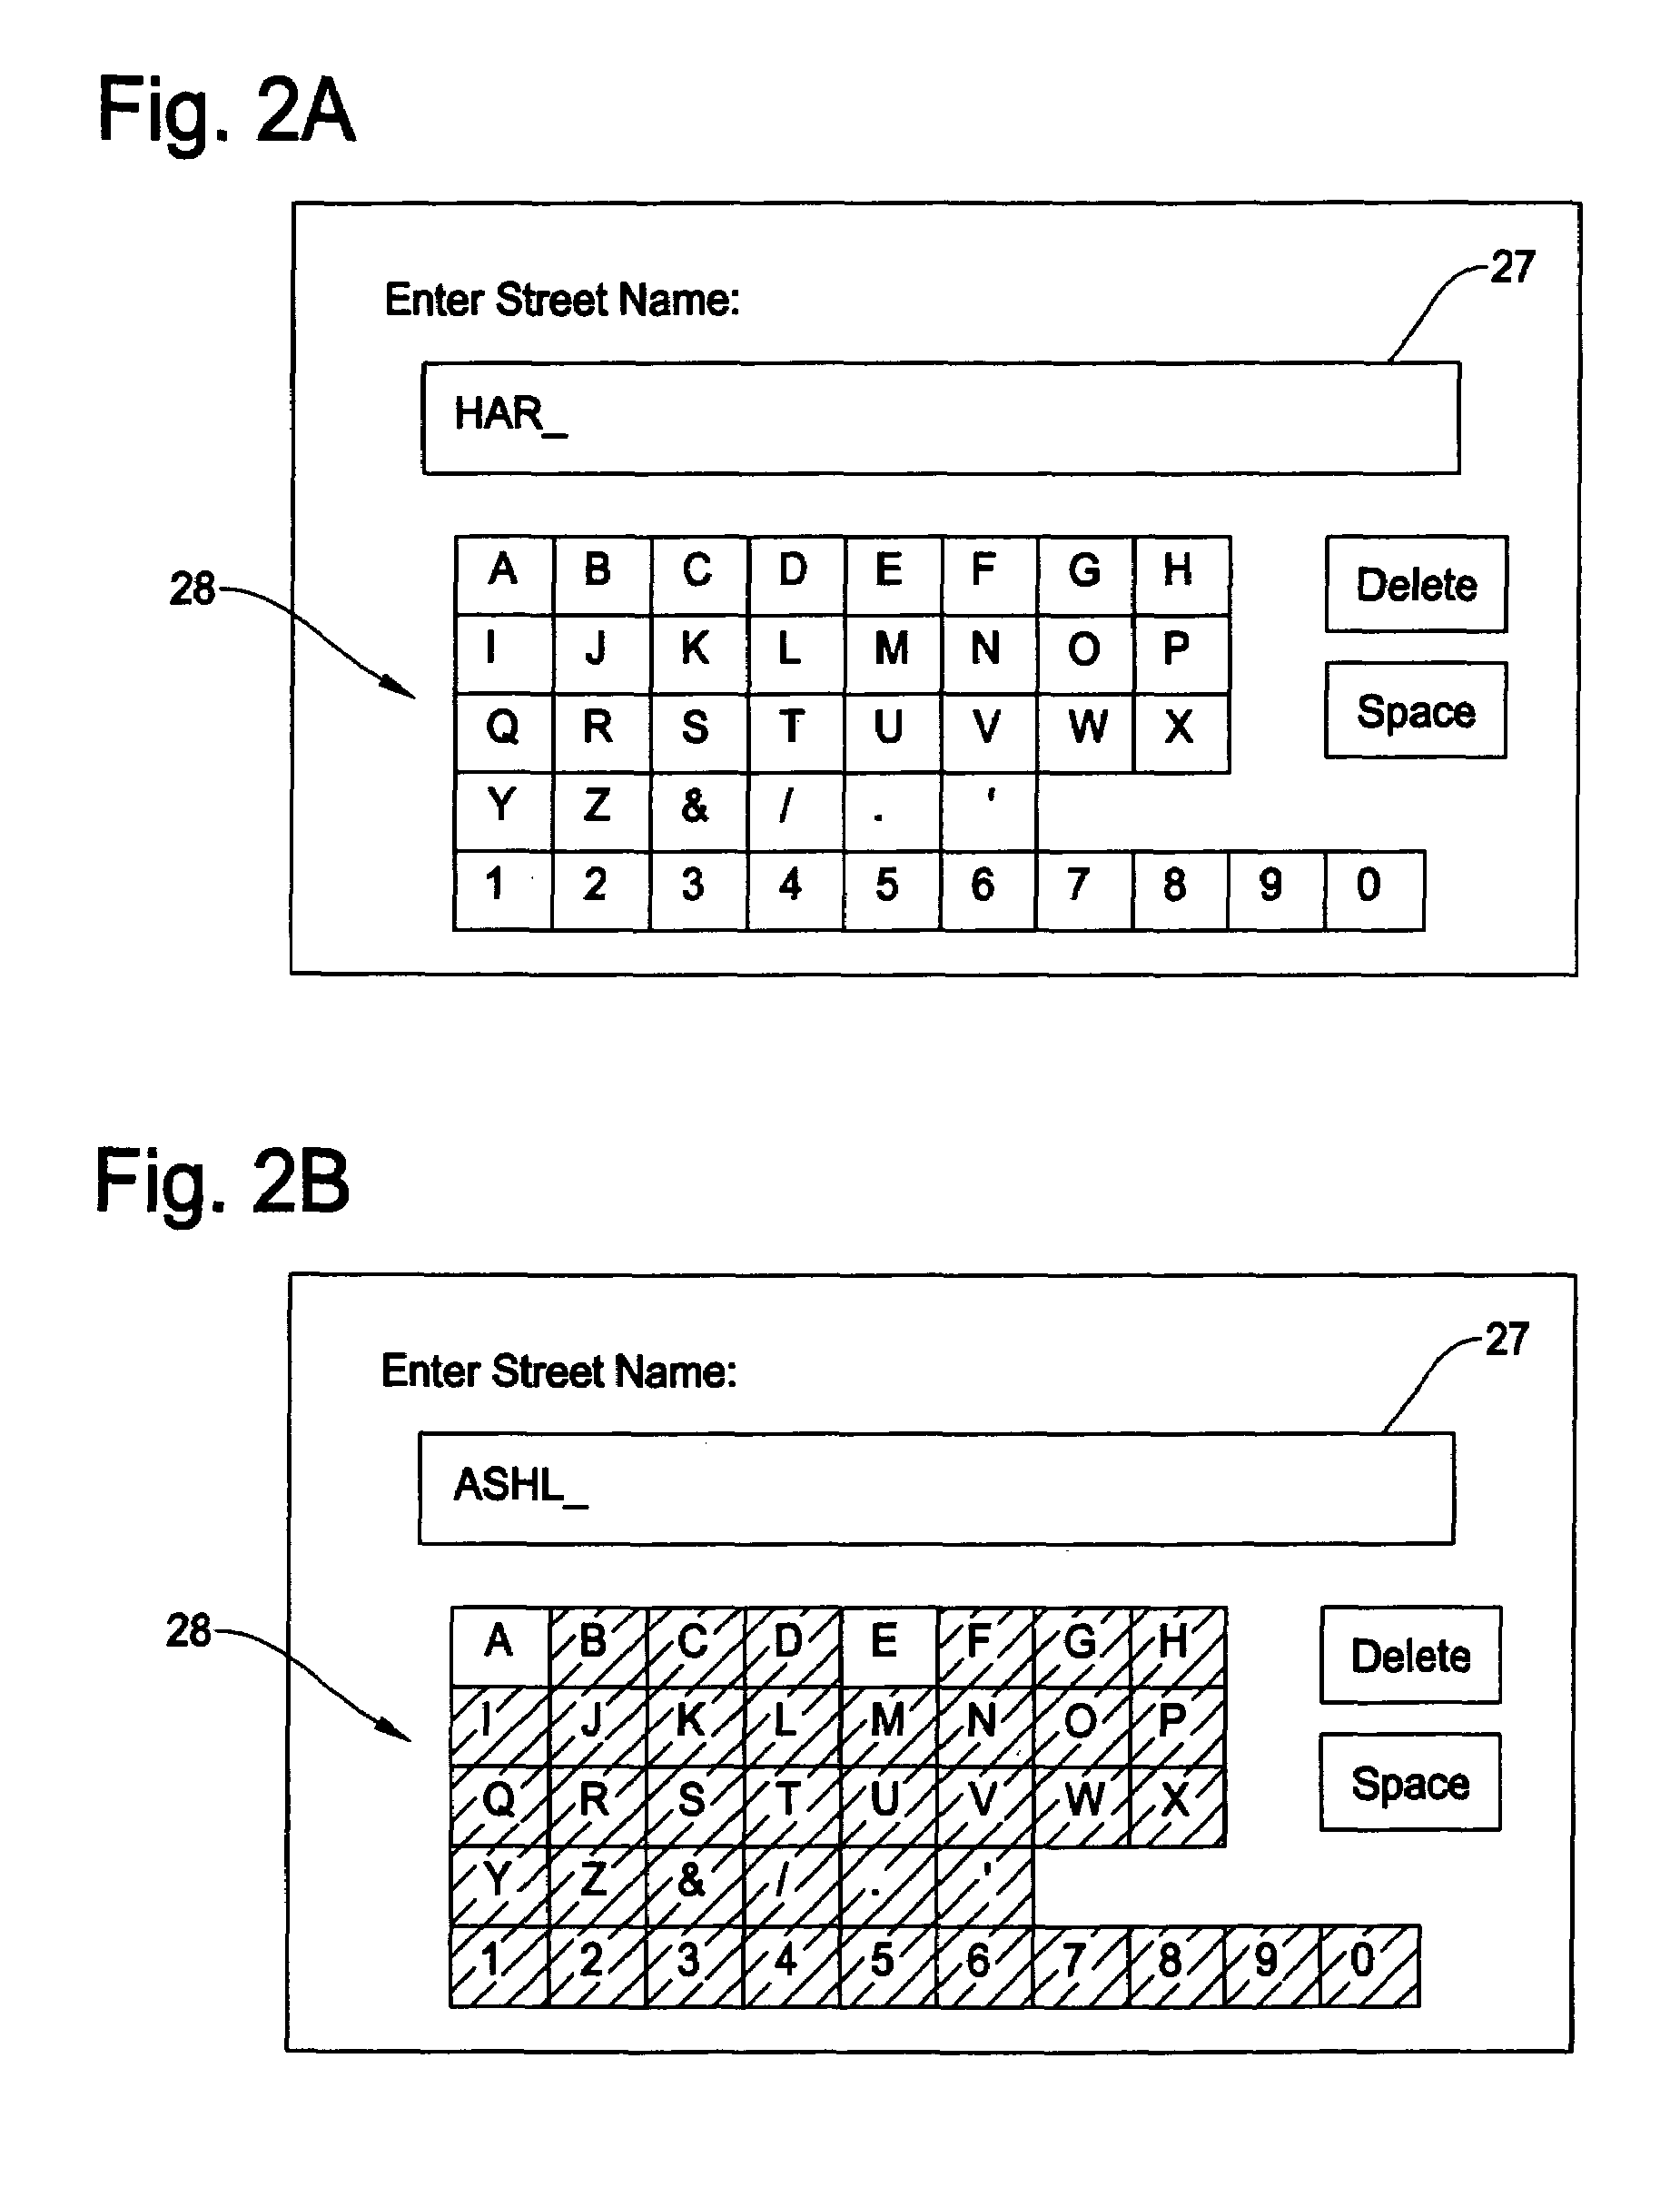 Address input method and apparatus for navigation system